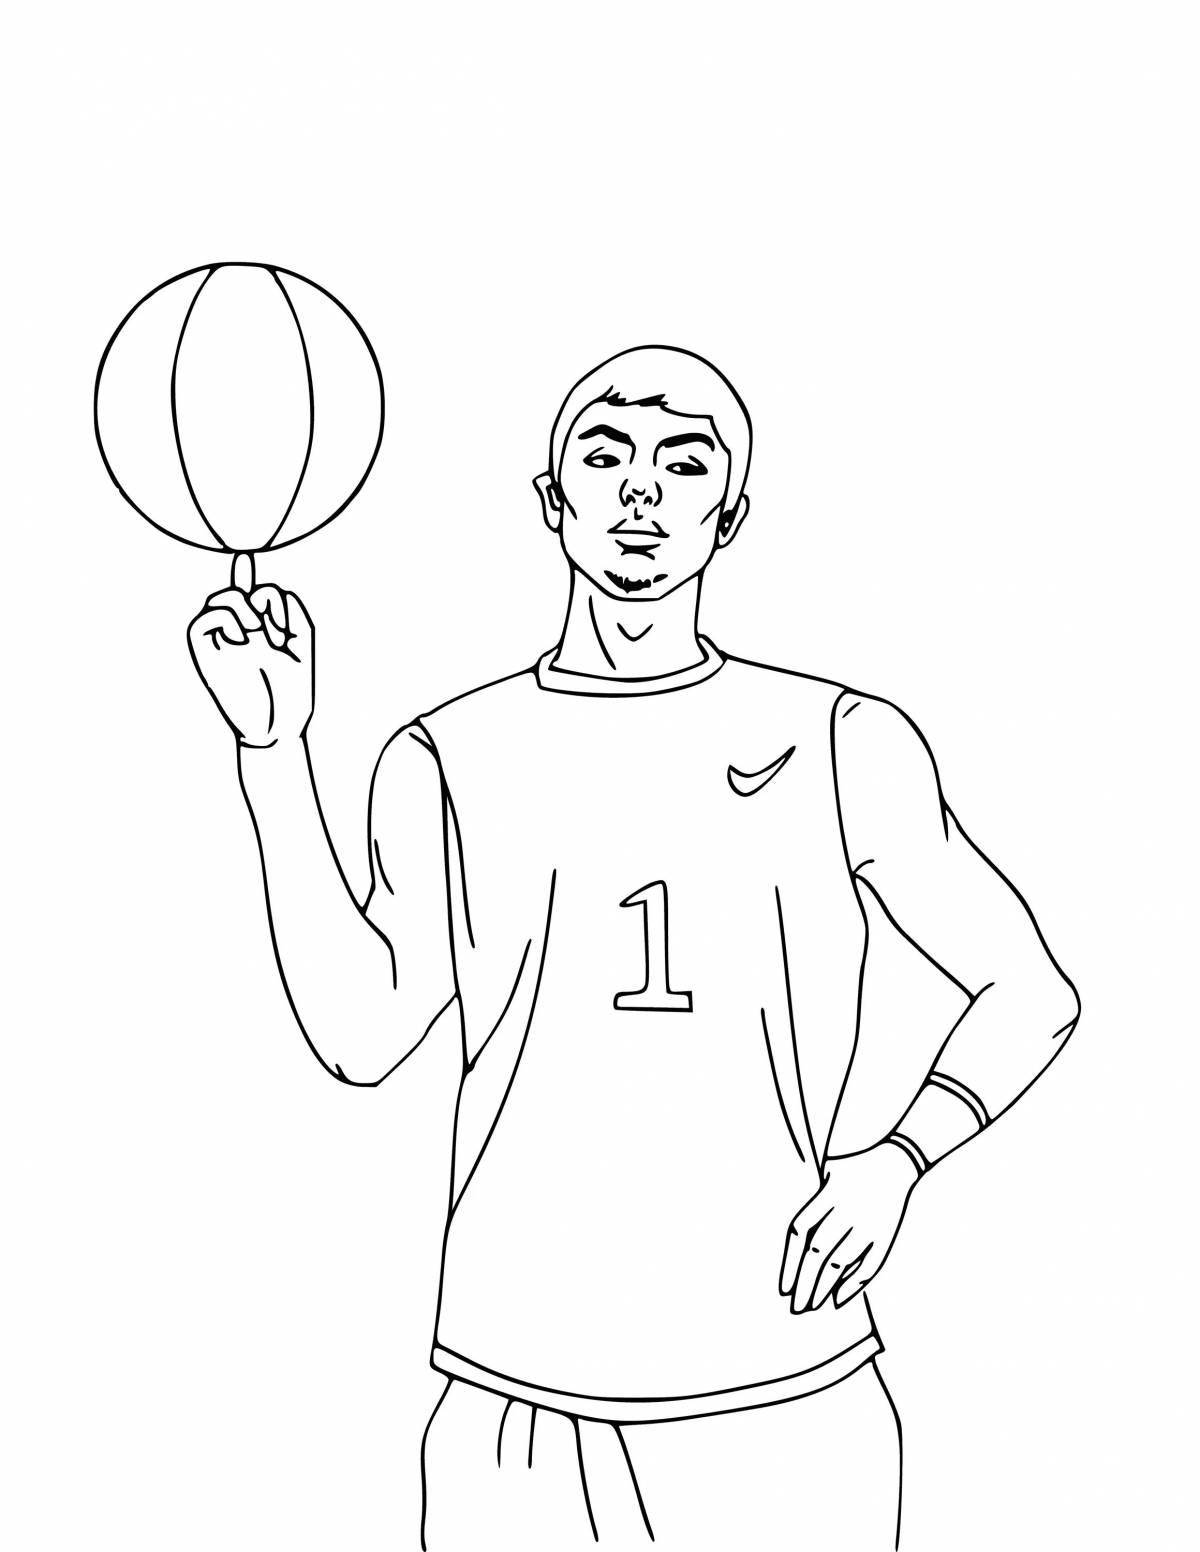 Coloring page cheerful coach